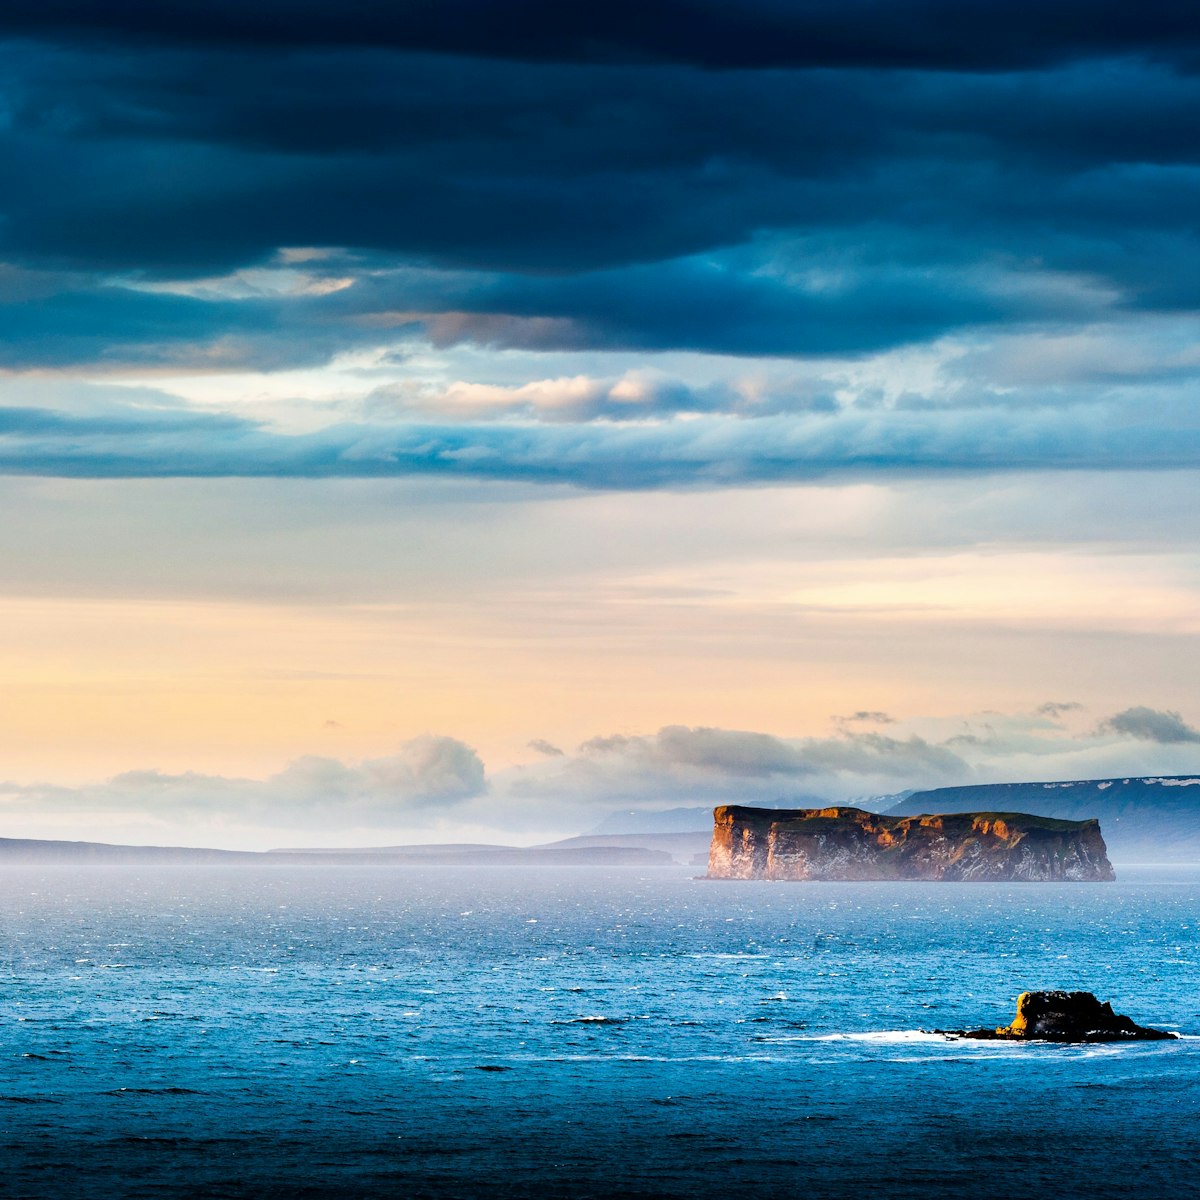 drangey island during midnight sun, northern iceland; drangey is the place of the classic Grettis saga